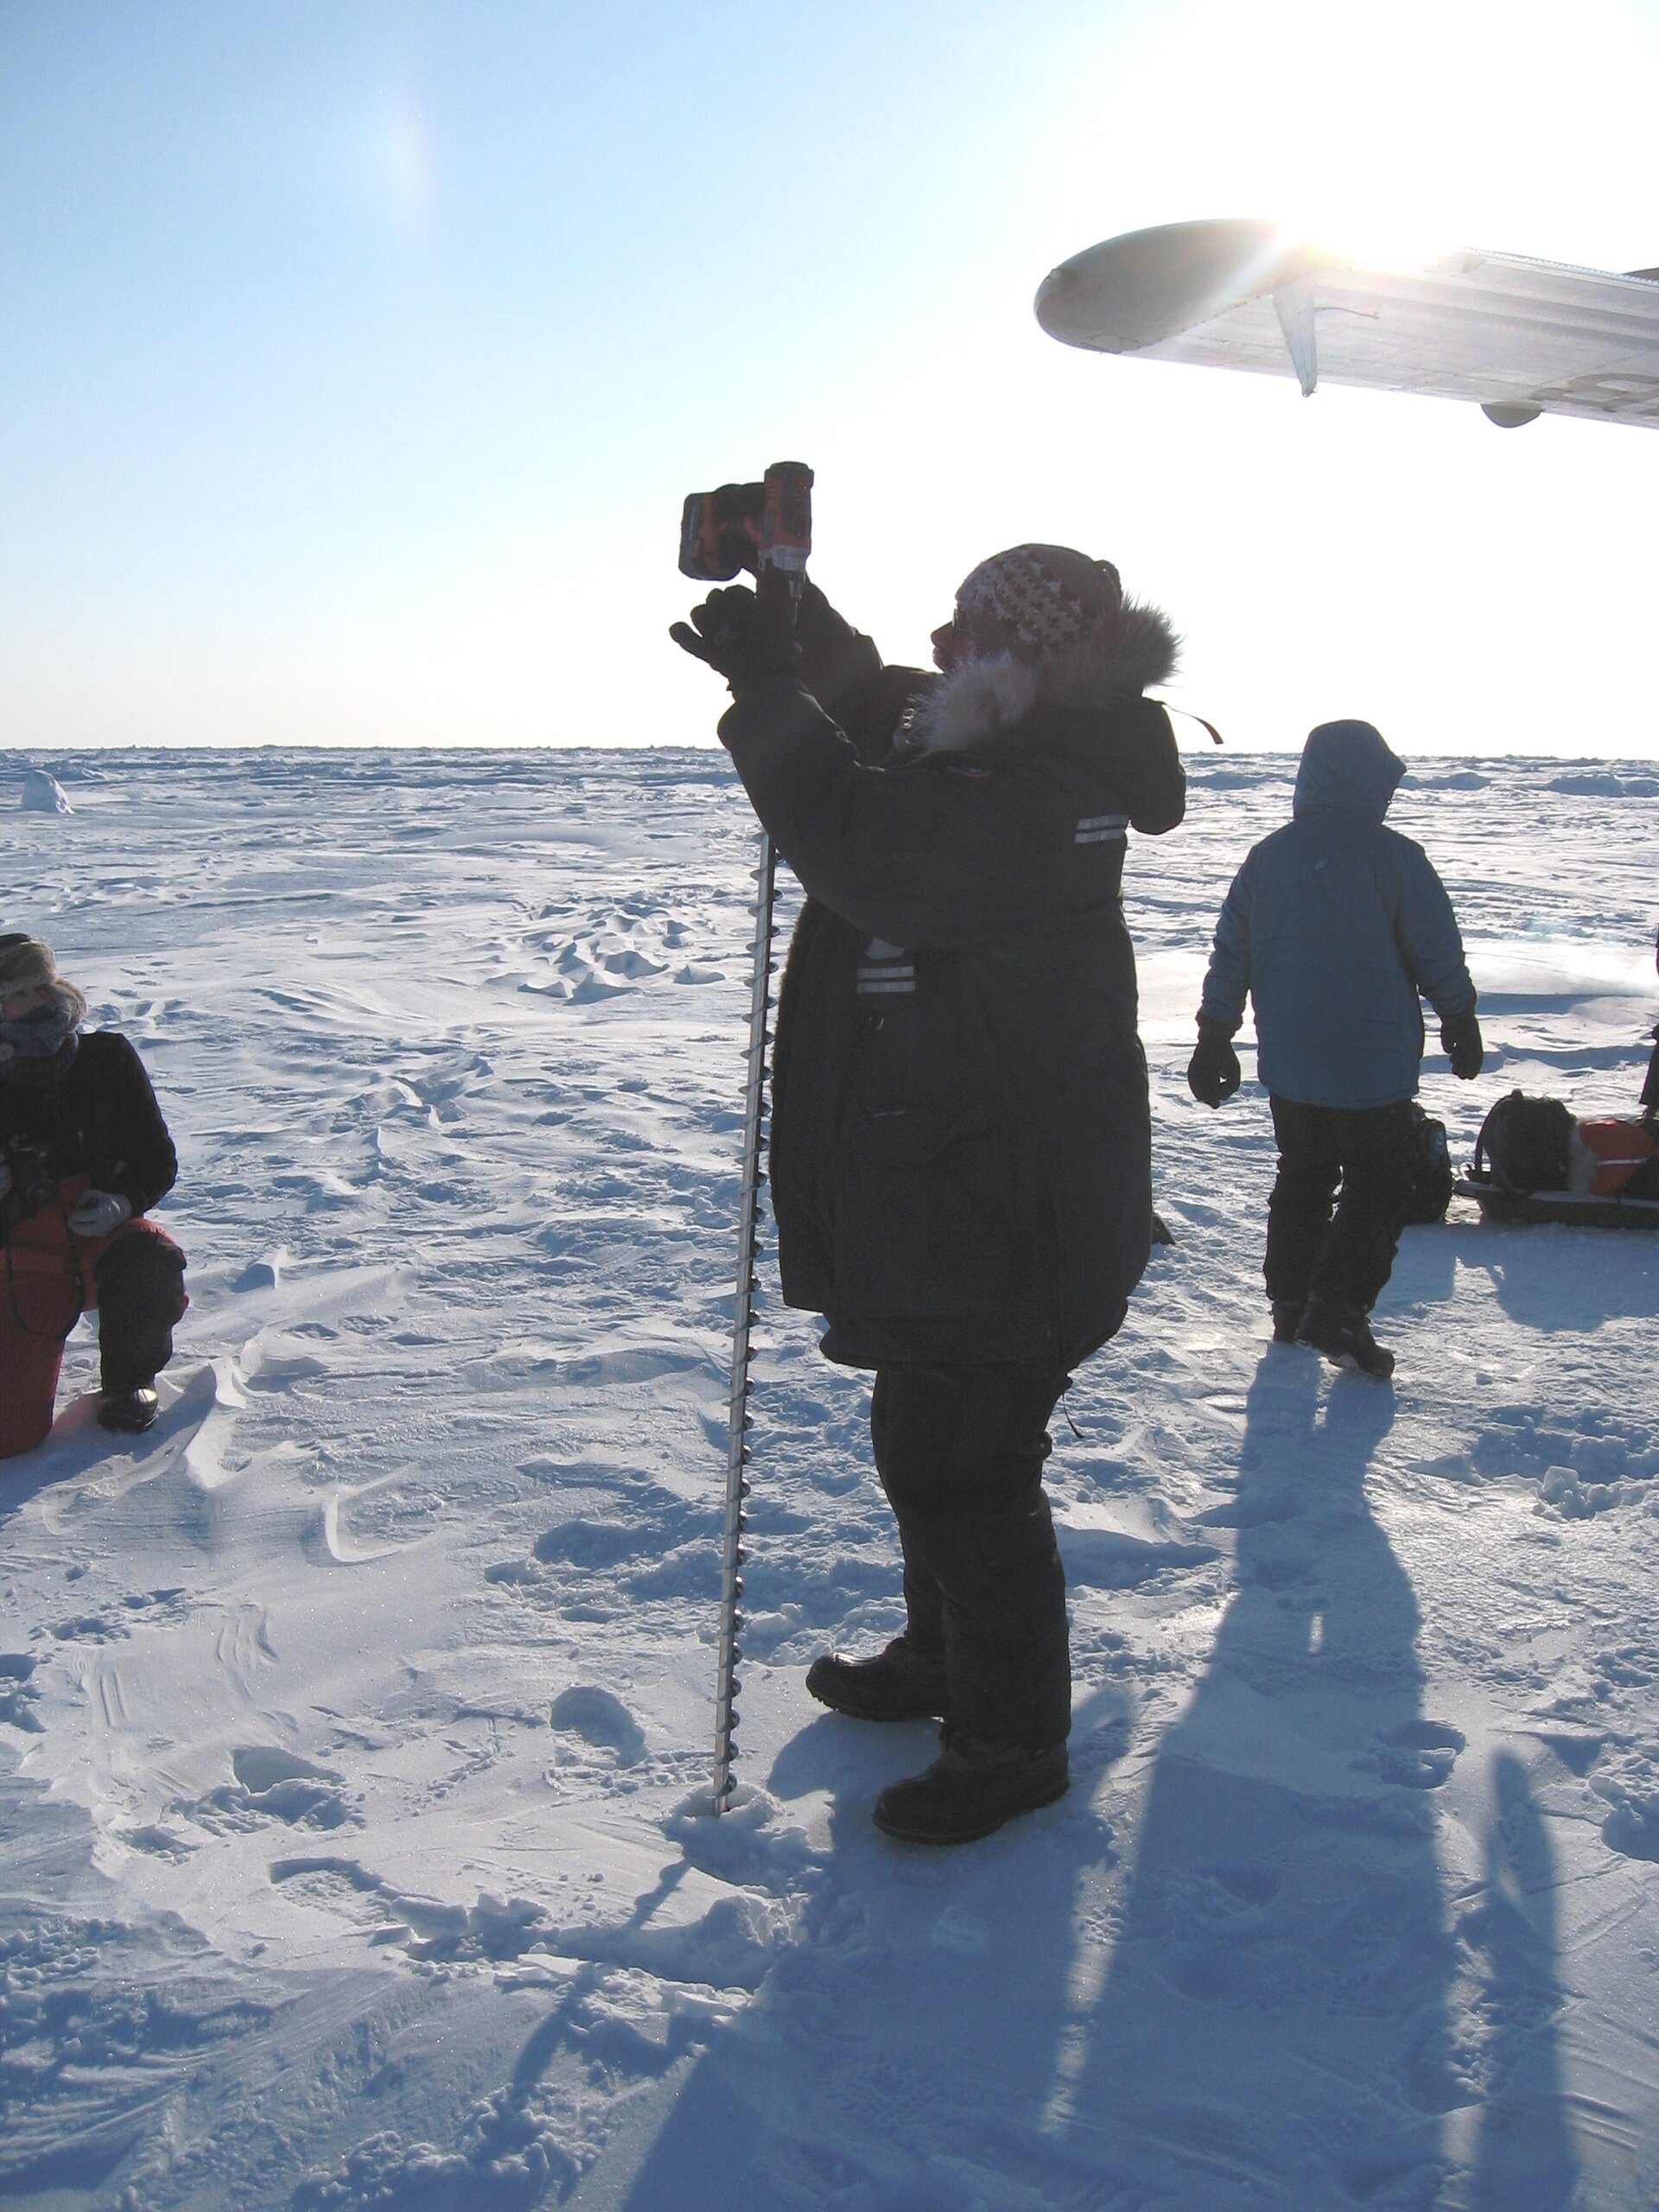 ESA - Drilling to measure ice thickness